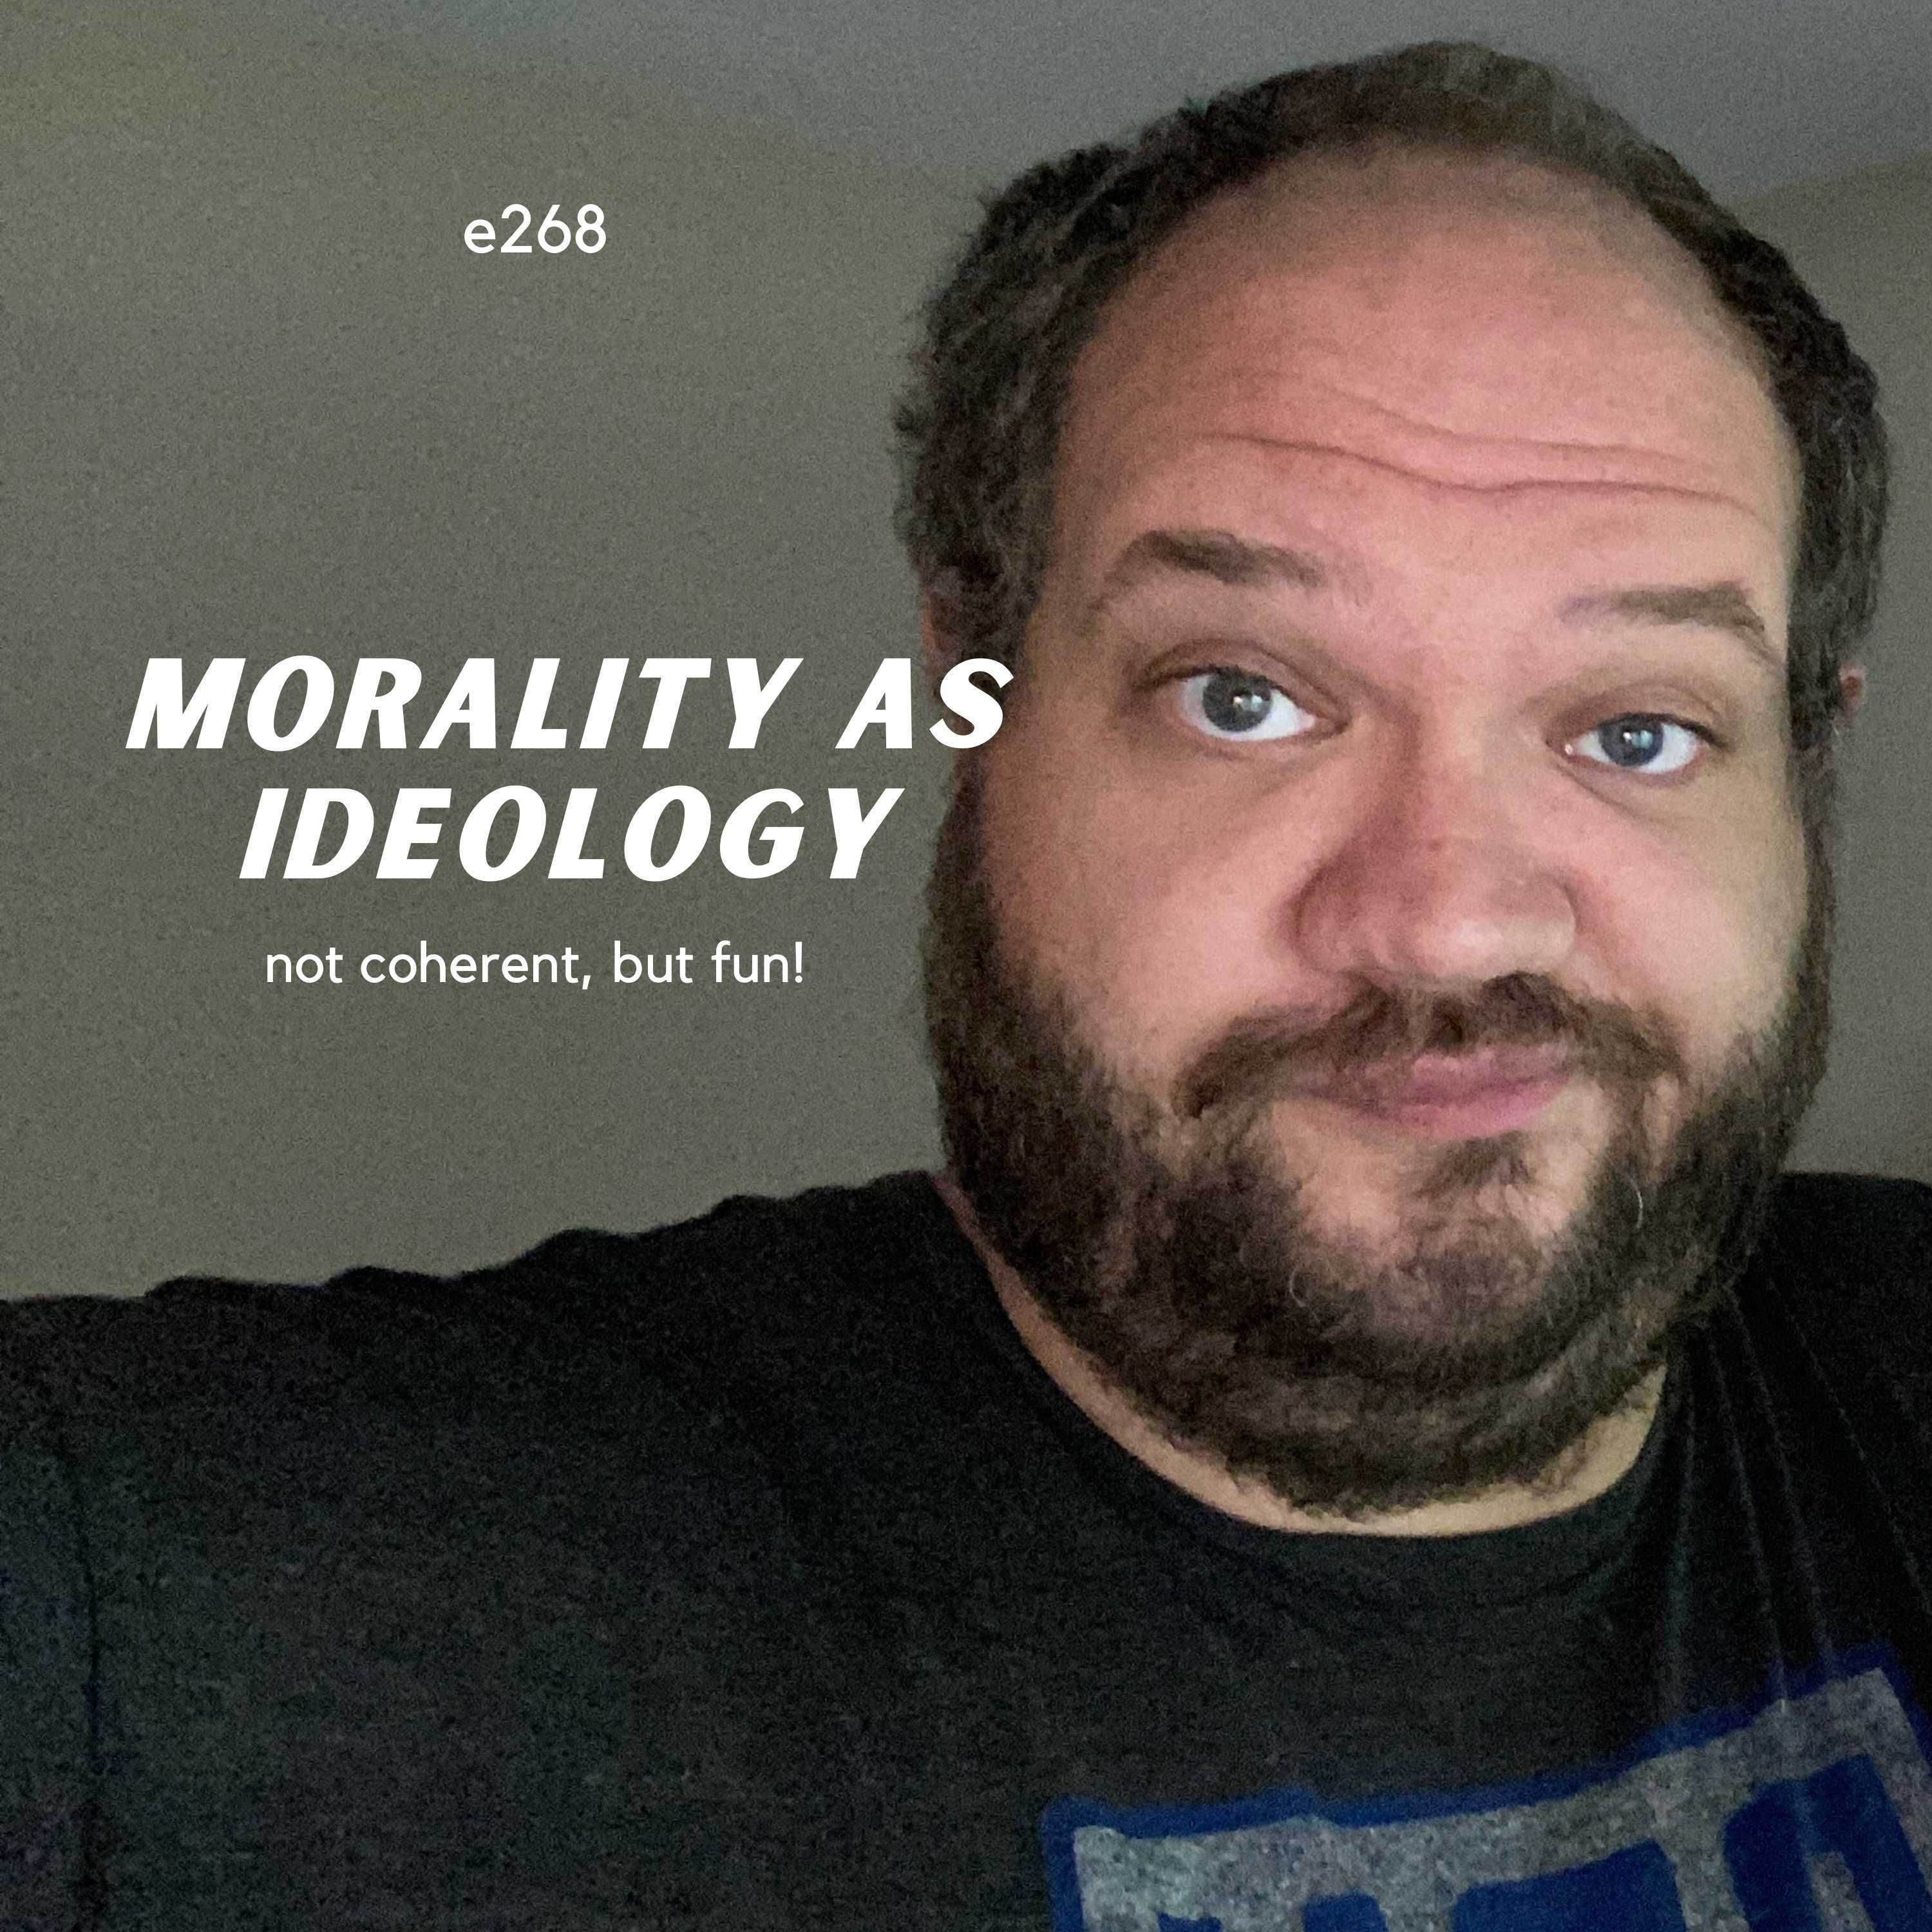 Morality as Ideology